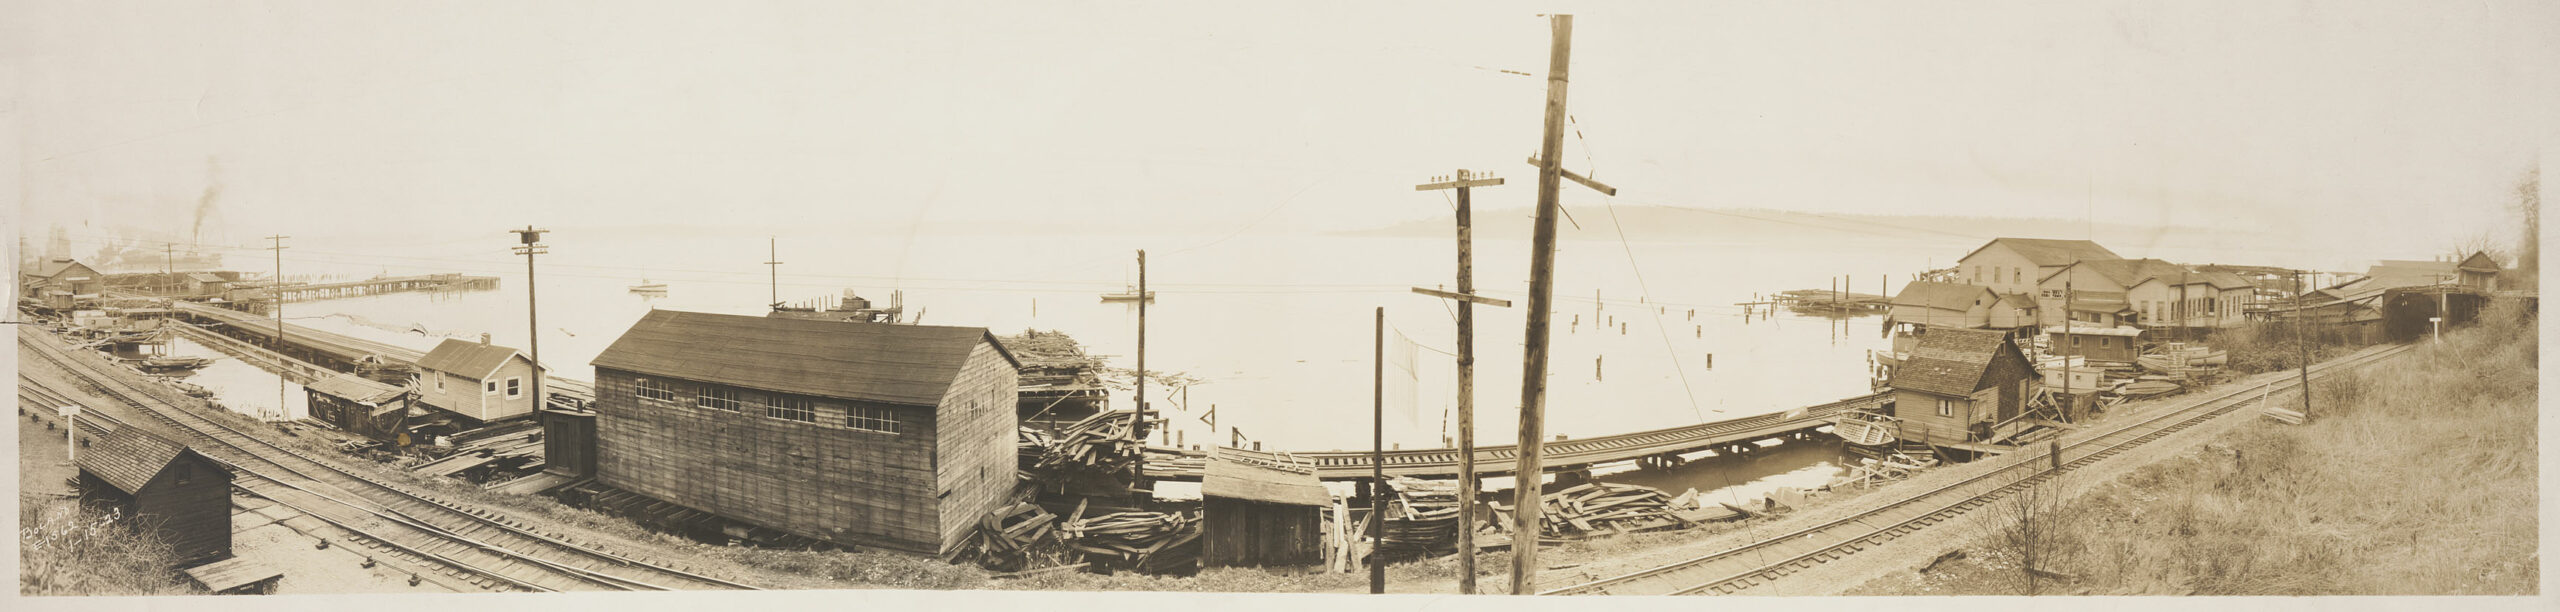 Panoramic view of the site of the former Tacoma Mill Company mill, 1923